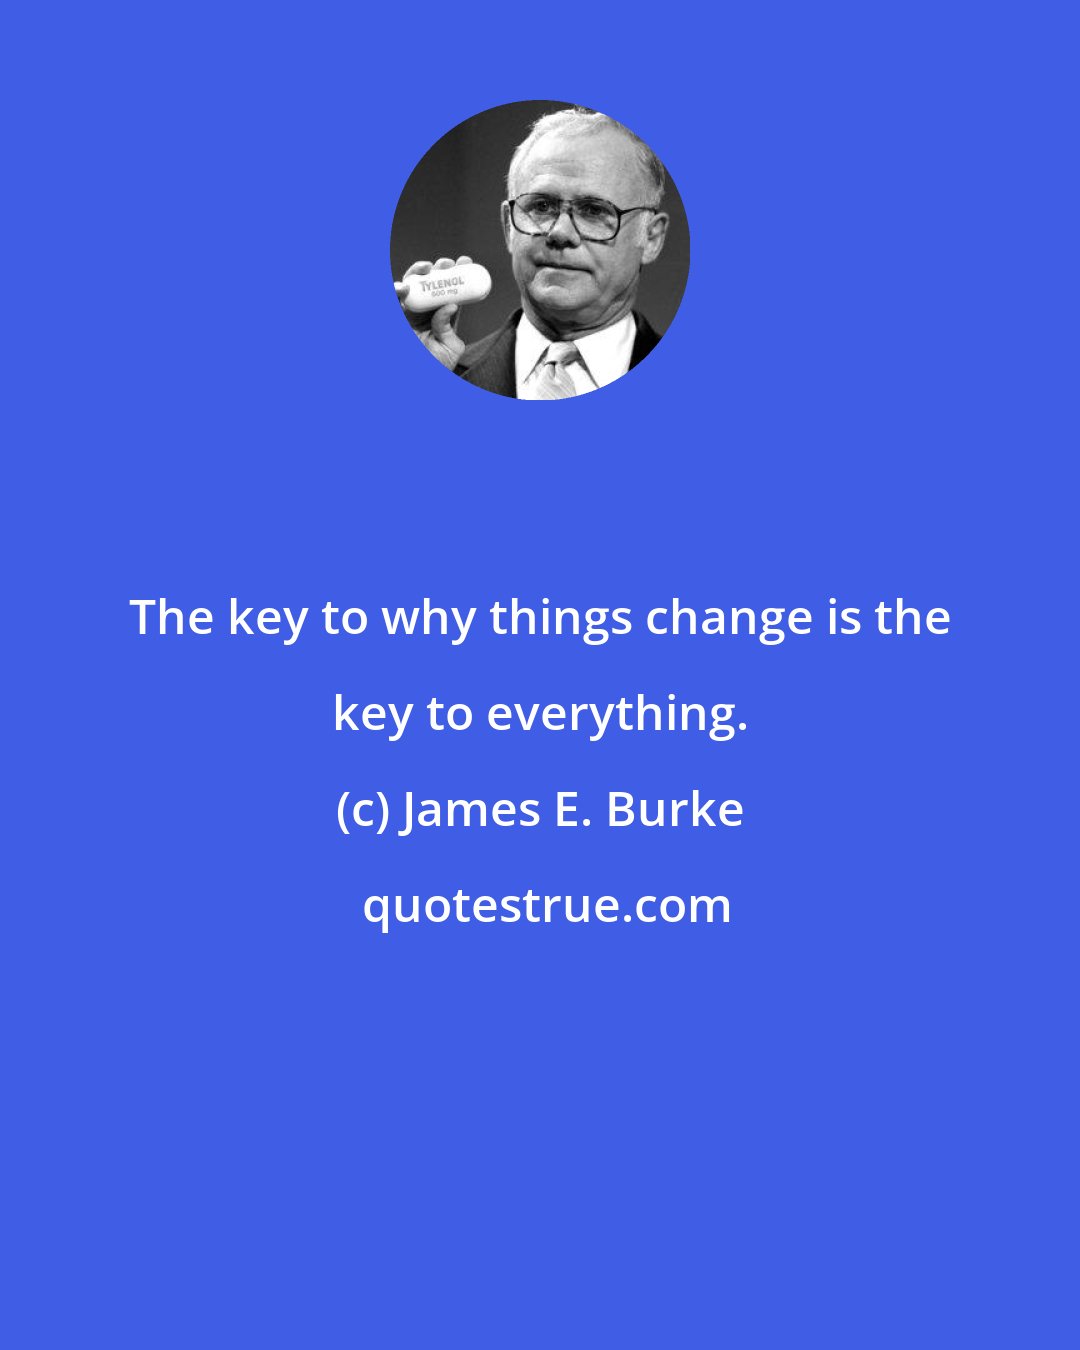 James E. Burke: The key to why things change is the key to everything.